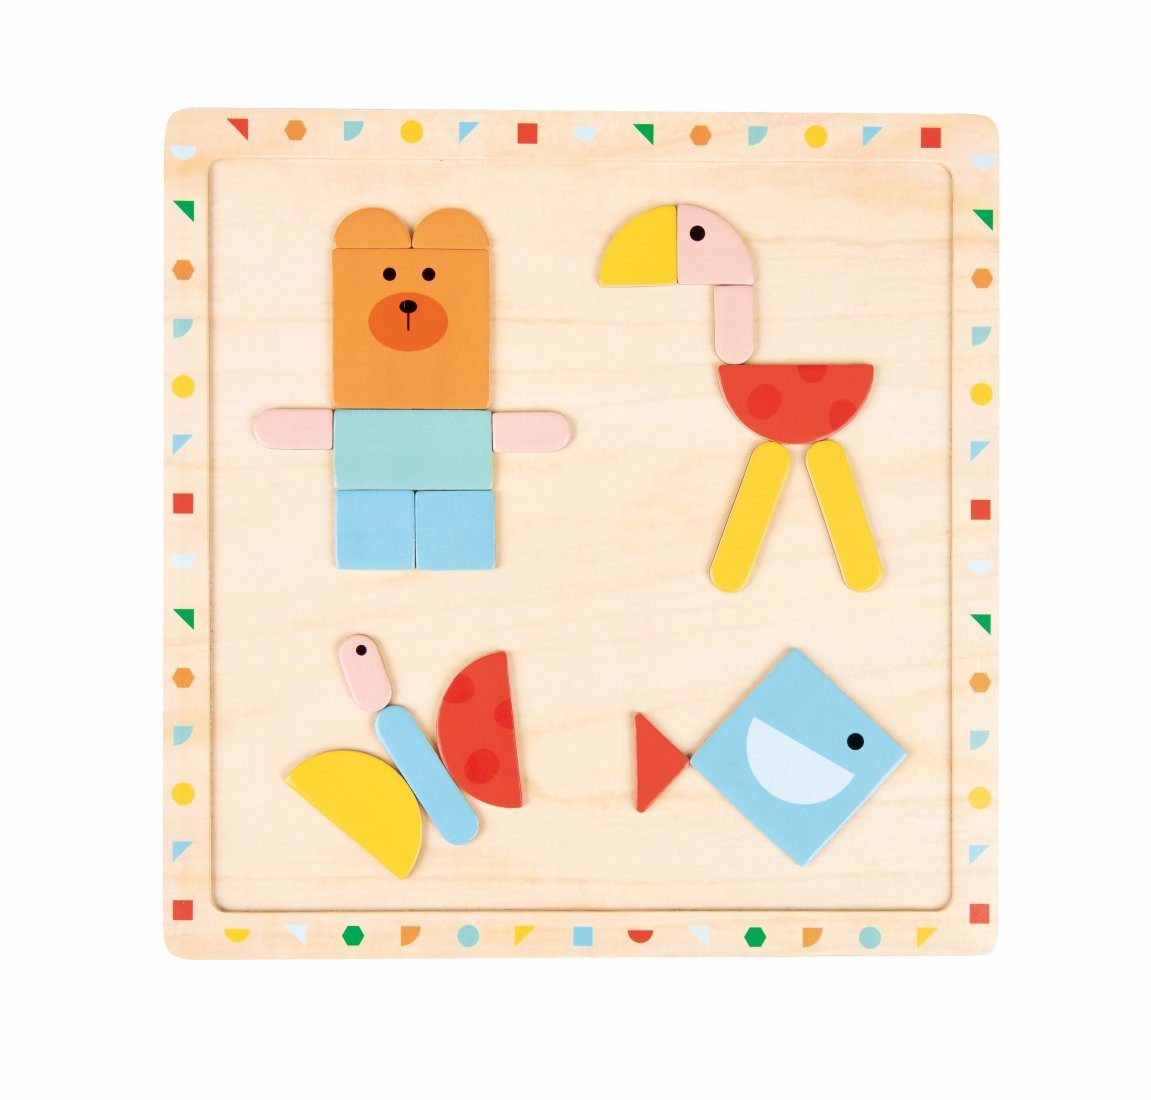 Lelin Lernspielzeug 20227 Magnetic shape Puzzle Puzzle and kreativ - Magnetisches creative